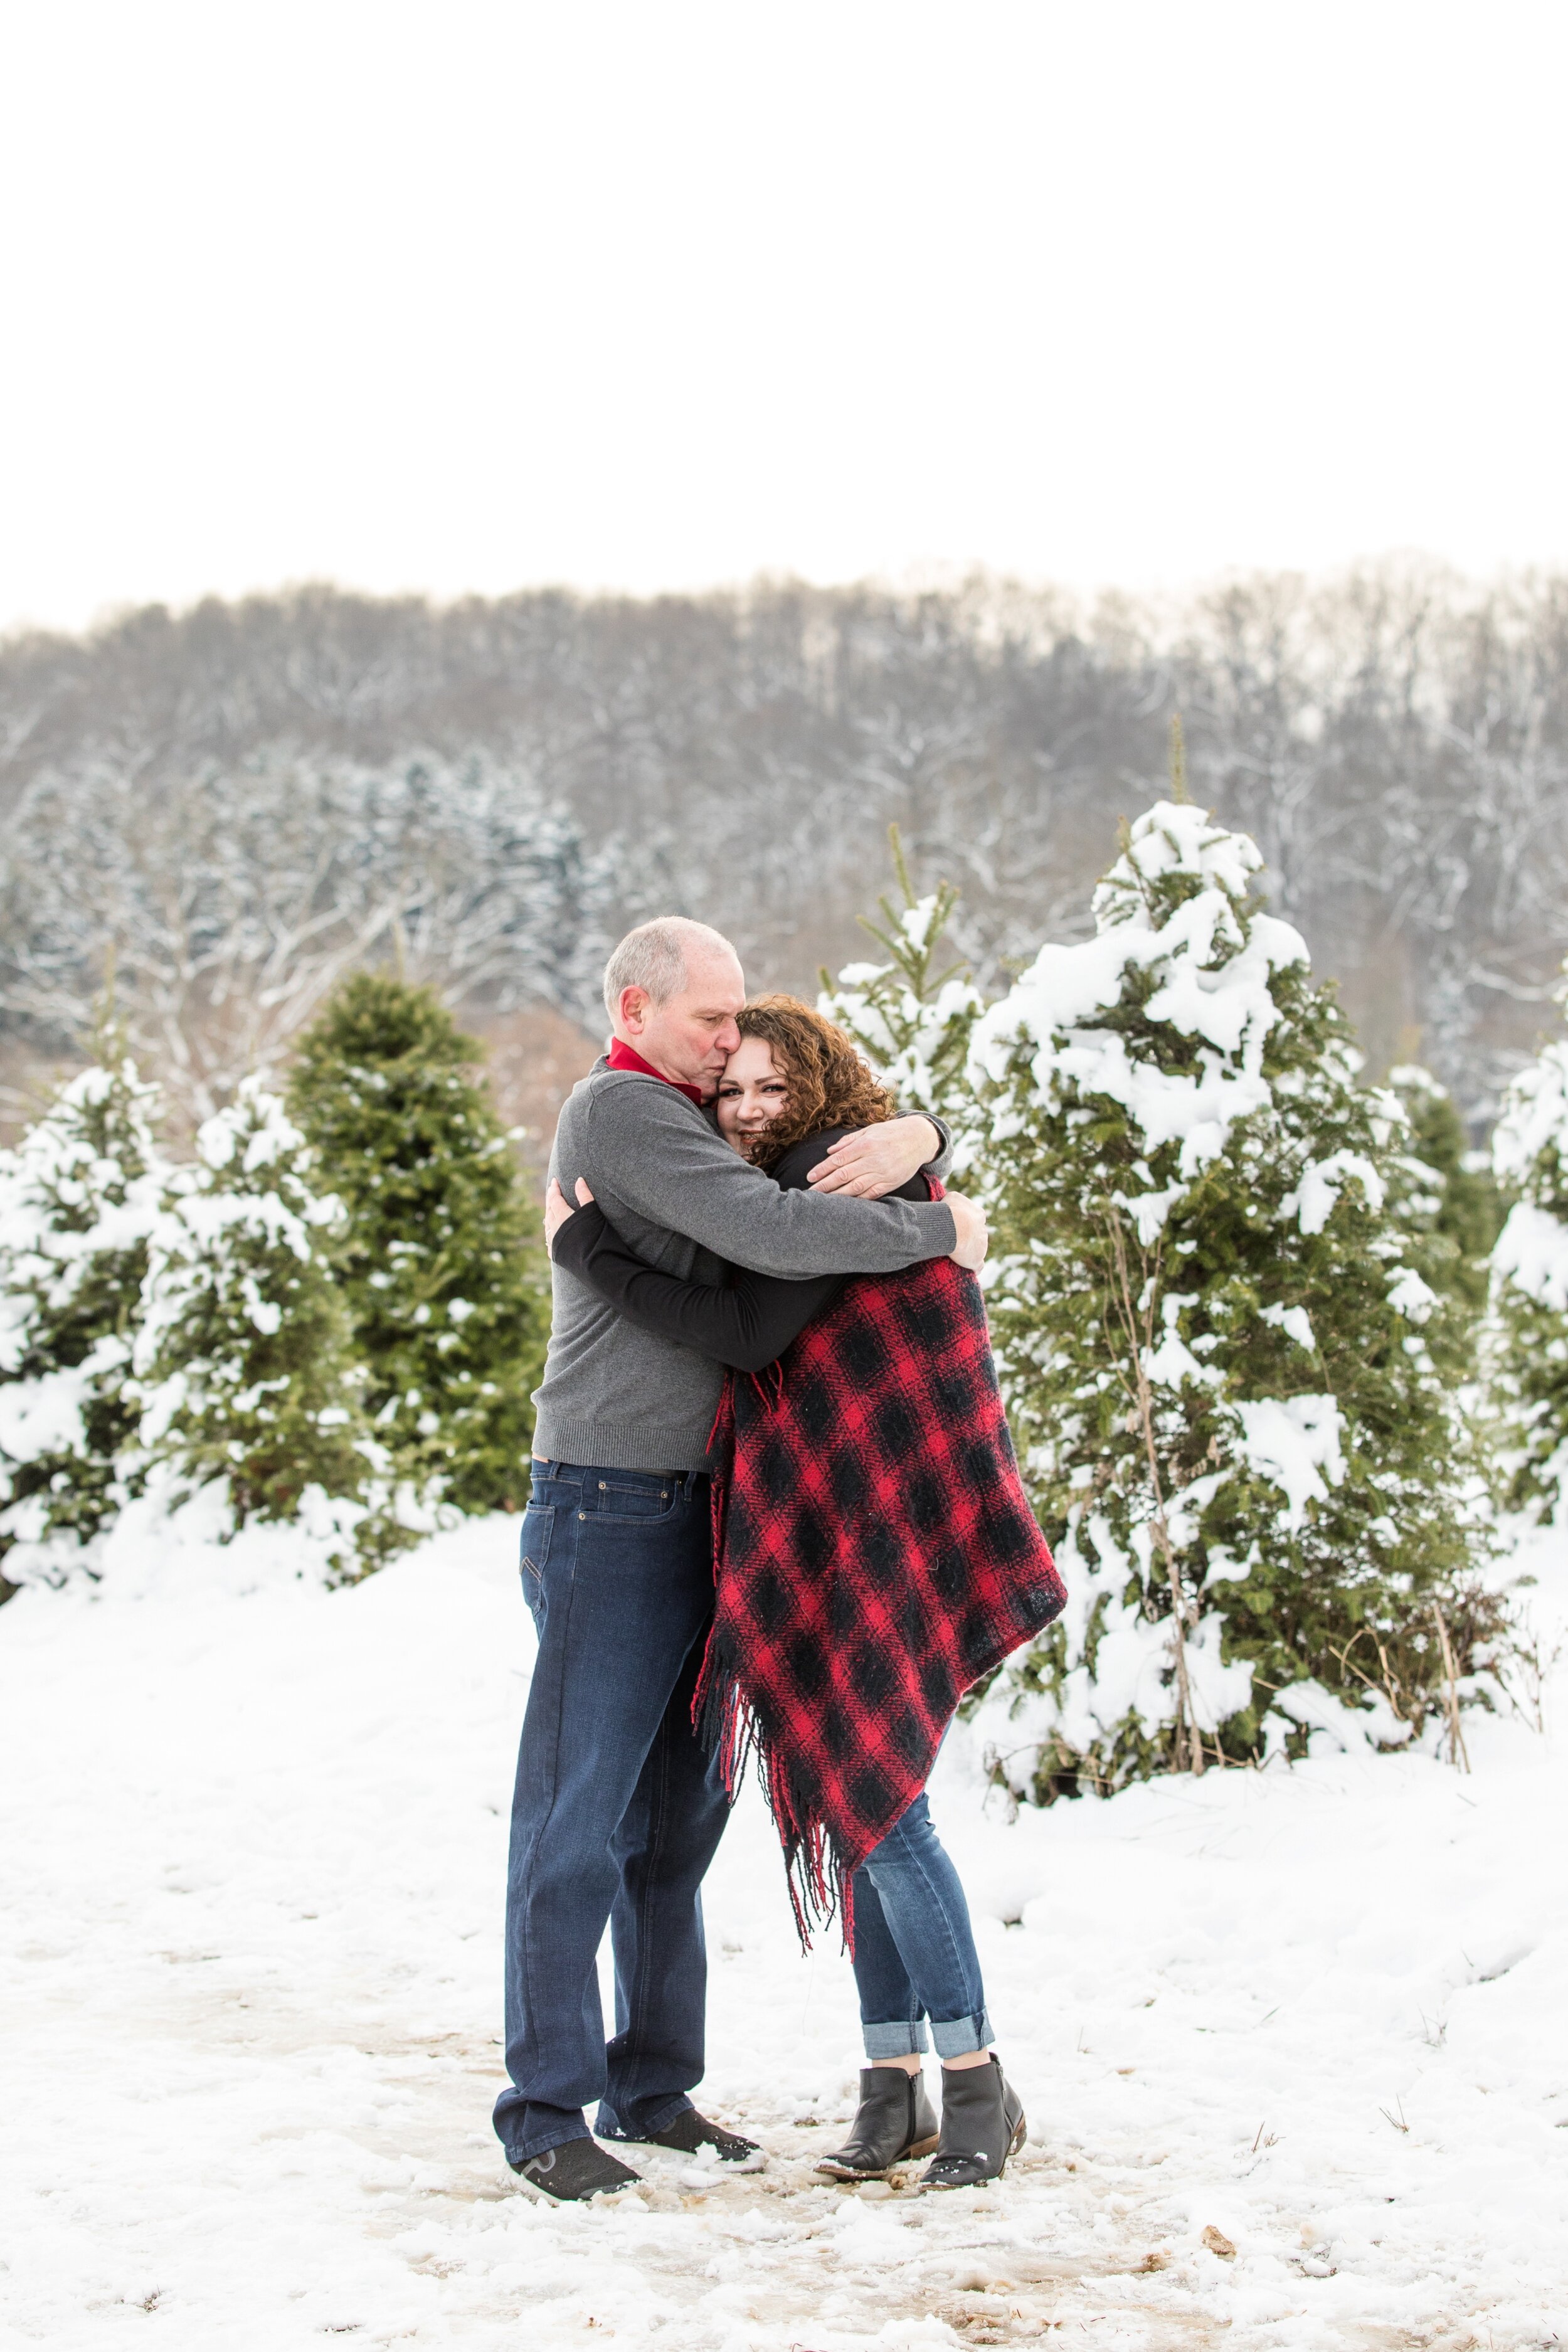 Winter Photoshoot Outfit Ideas: The Do's and Don'ts — Jenna Hidinger  Photography